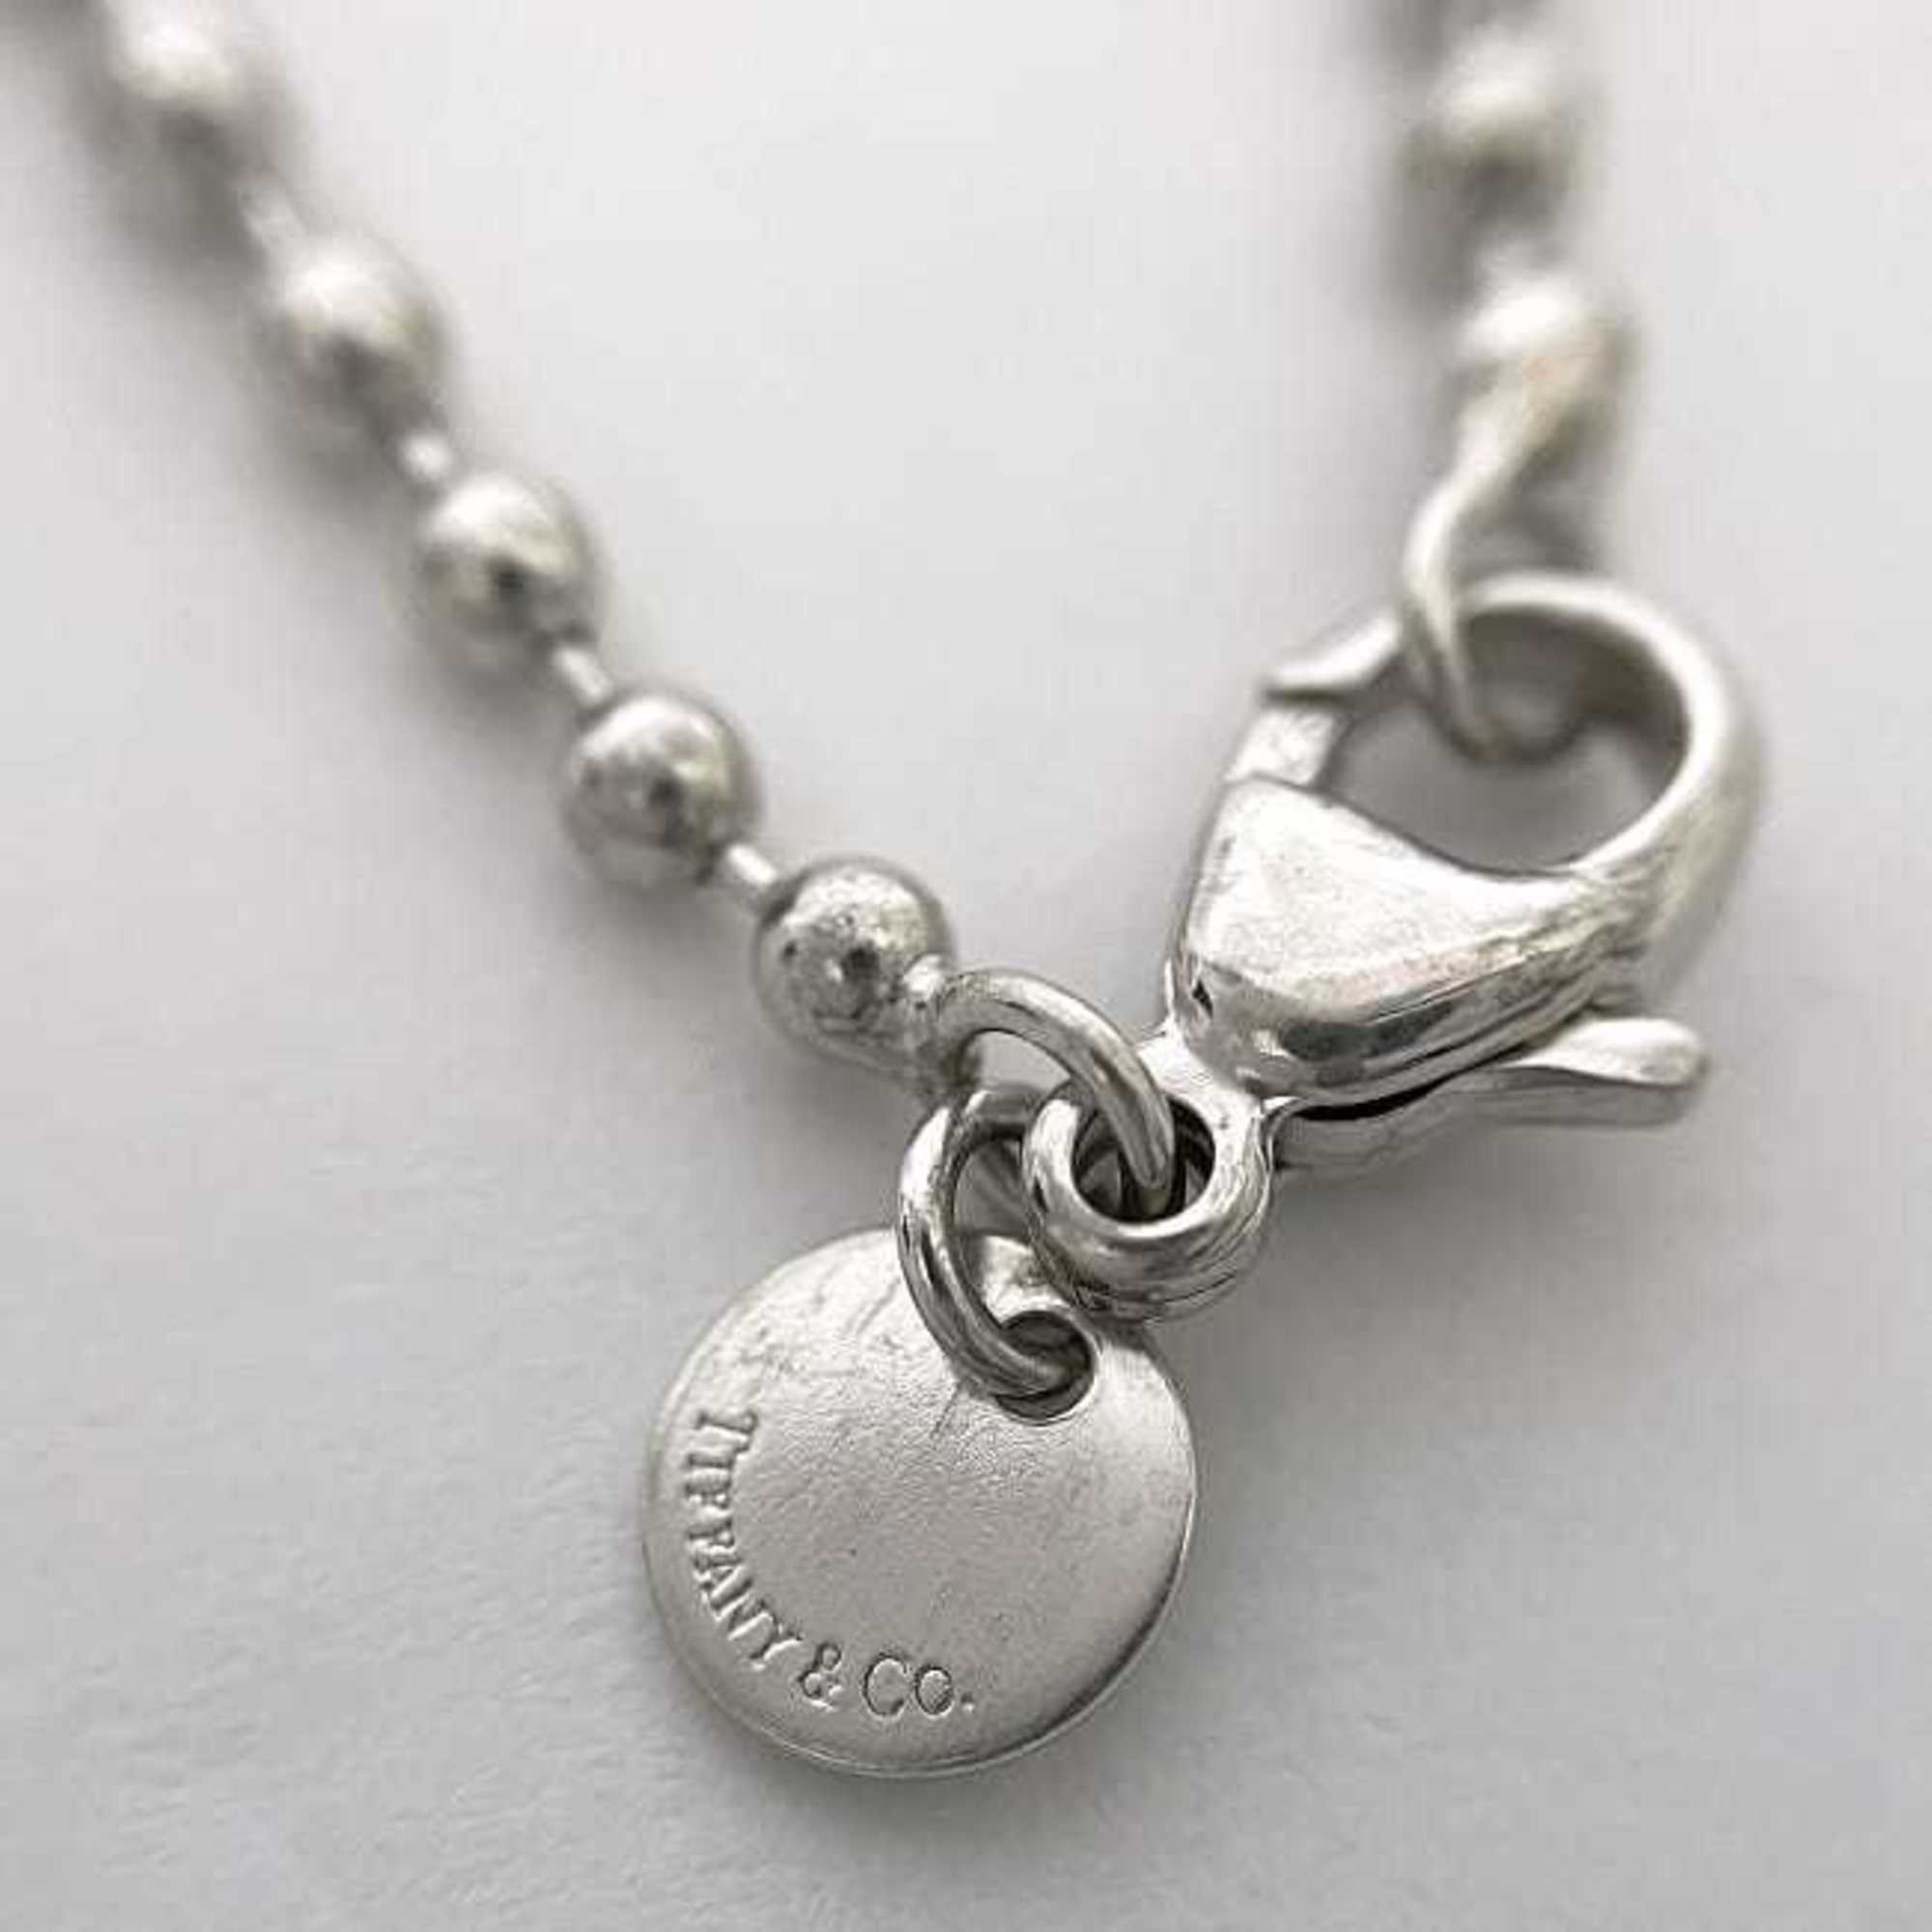 Tiffany Return To Necklace Silver ec-20005 Heart Ag 925 SILVER TIFFANY&Co. Ball Chain Tag Ladies